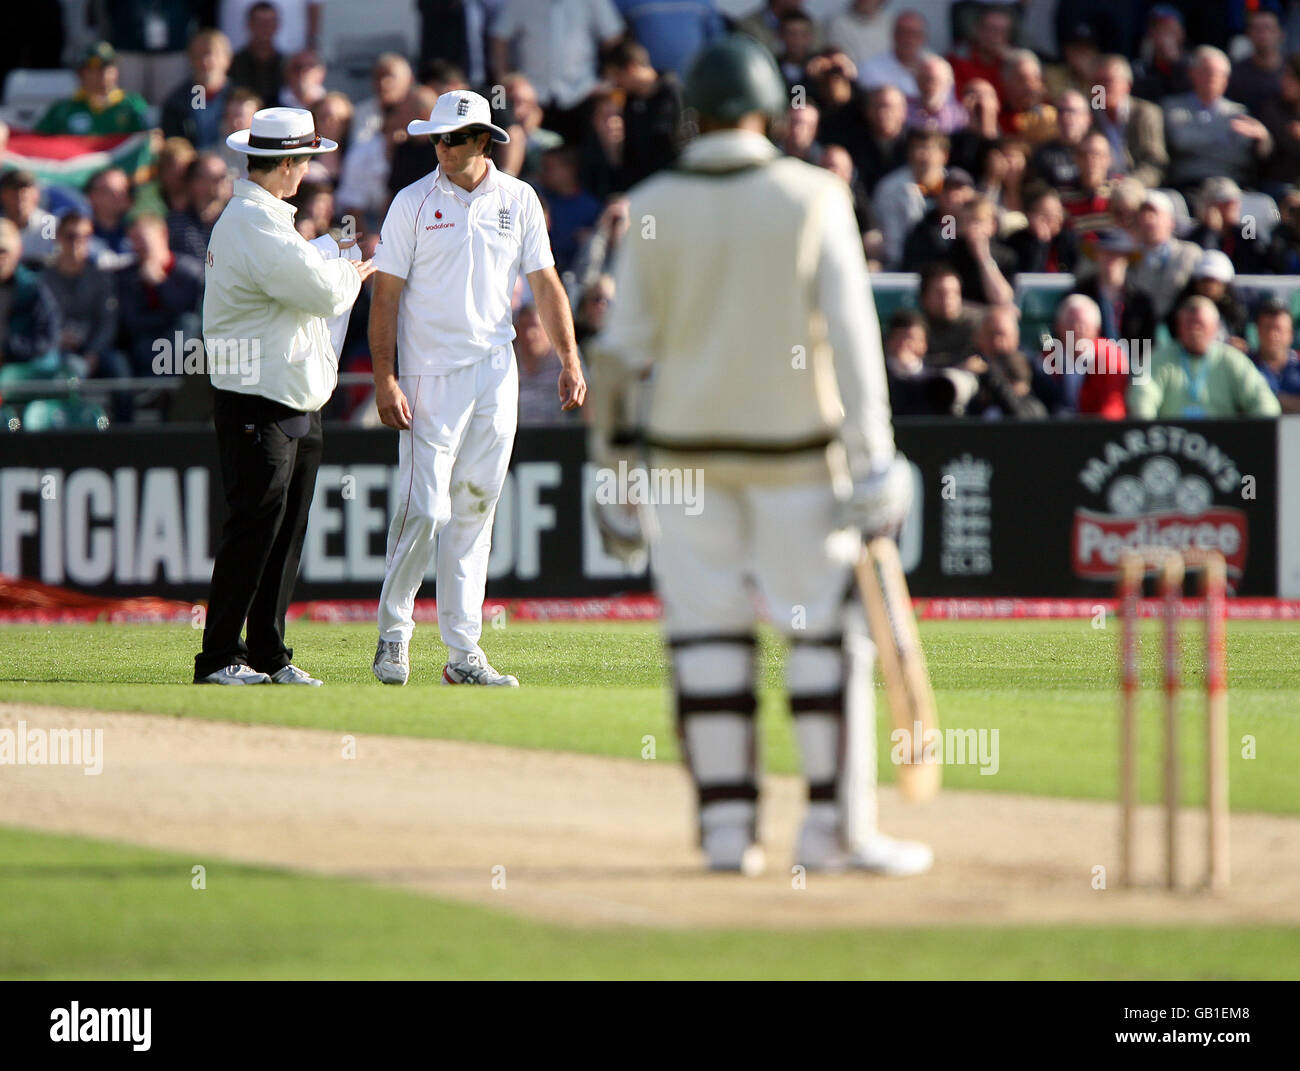 England's captain Michael Vaughan has words with umpire Billy Bowden after South Africa's Hashim Amla is recalled to the field Stock Photo